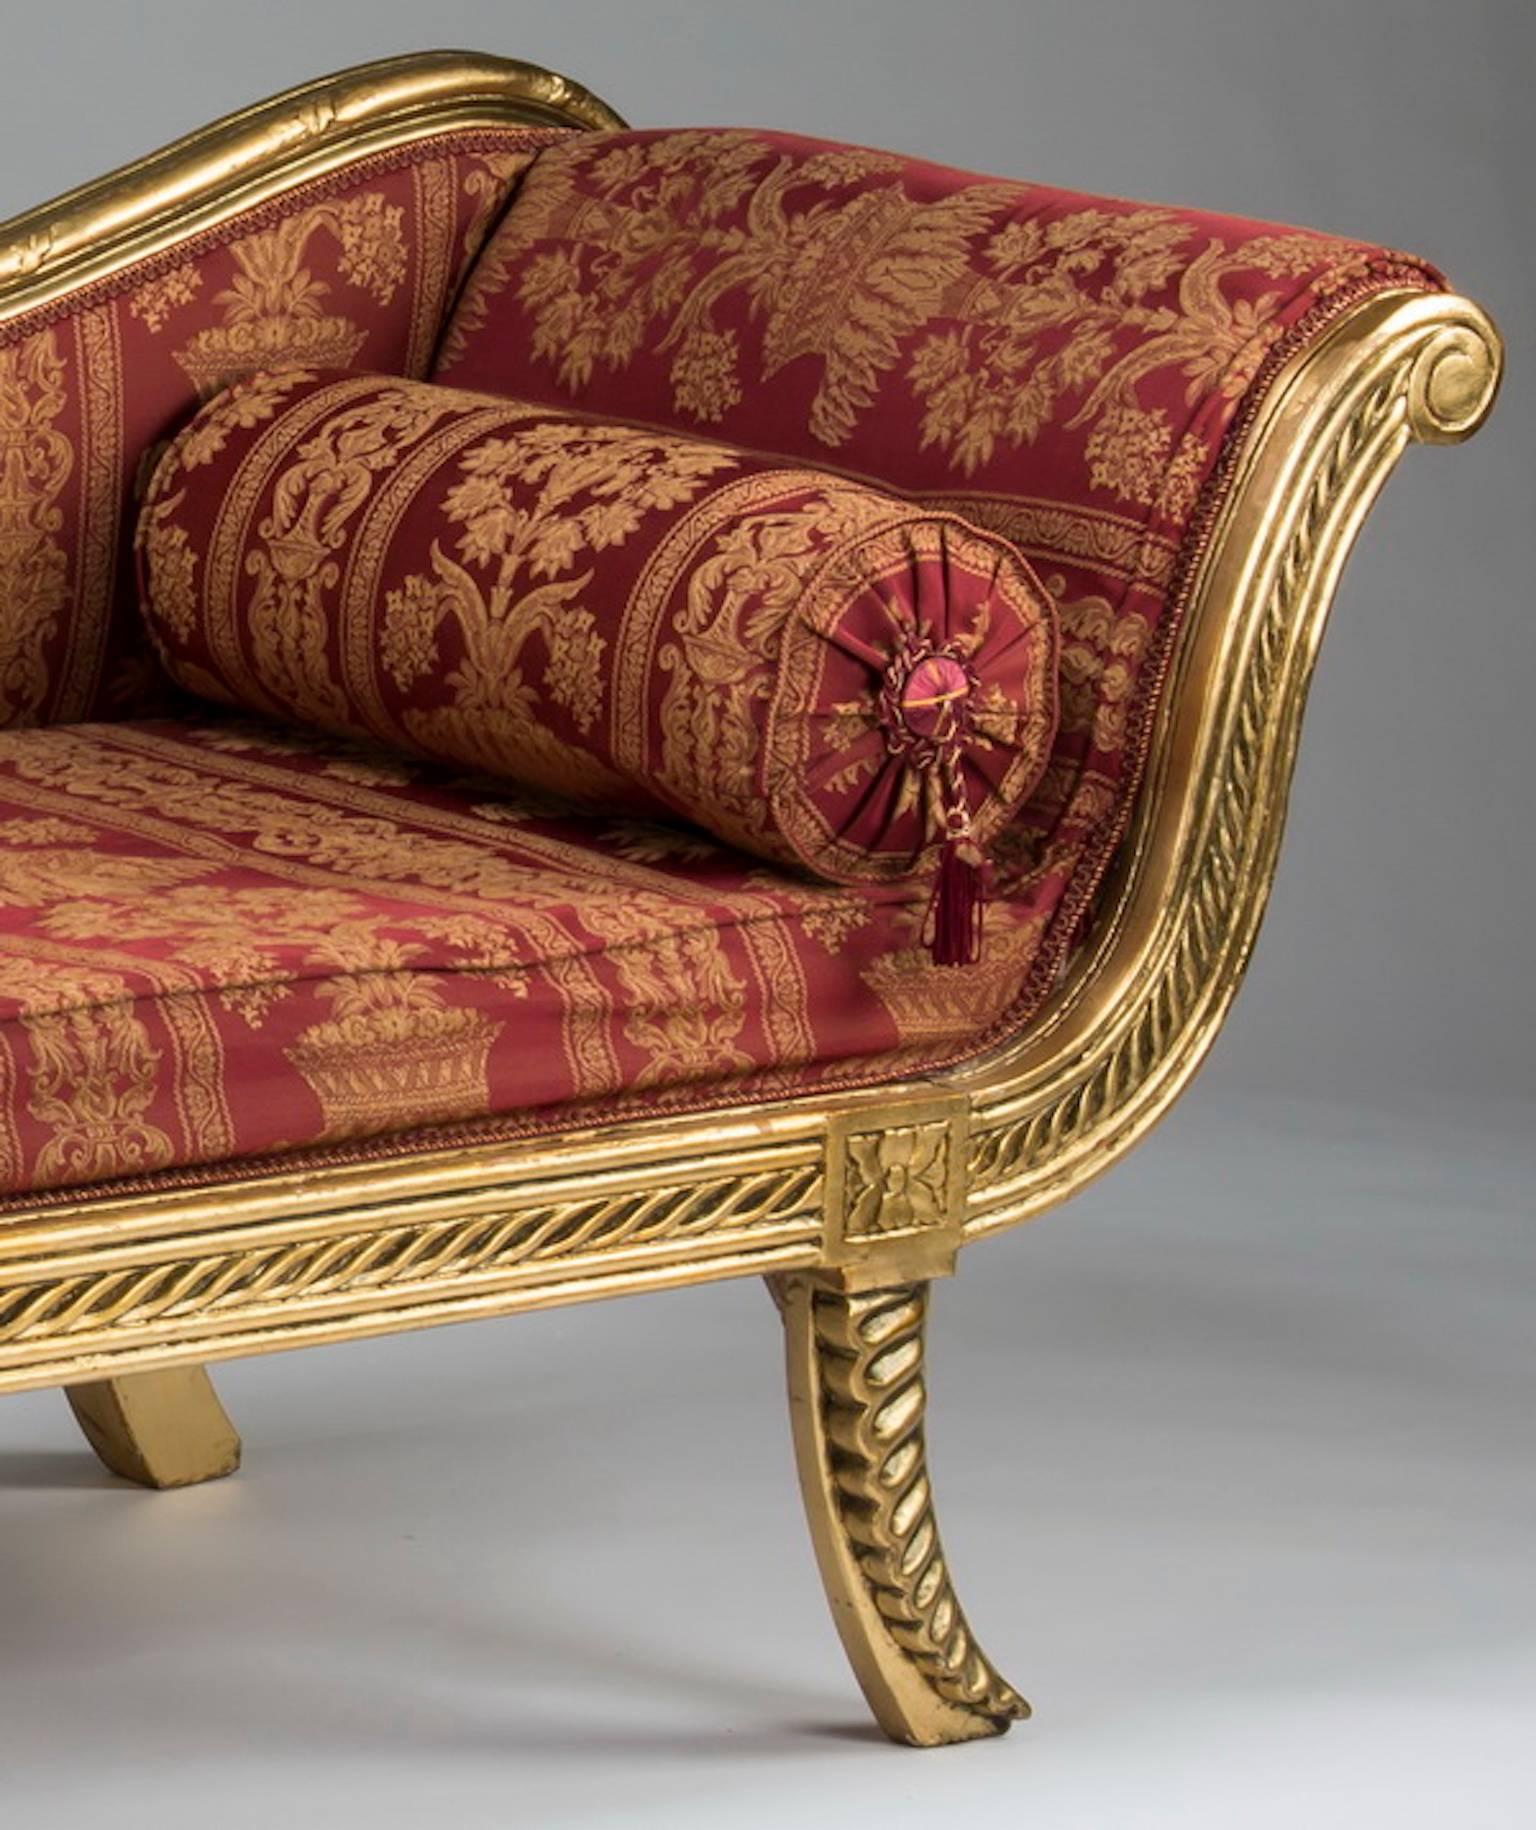 19th century chaise lounge